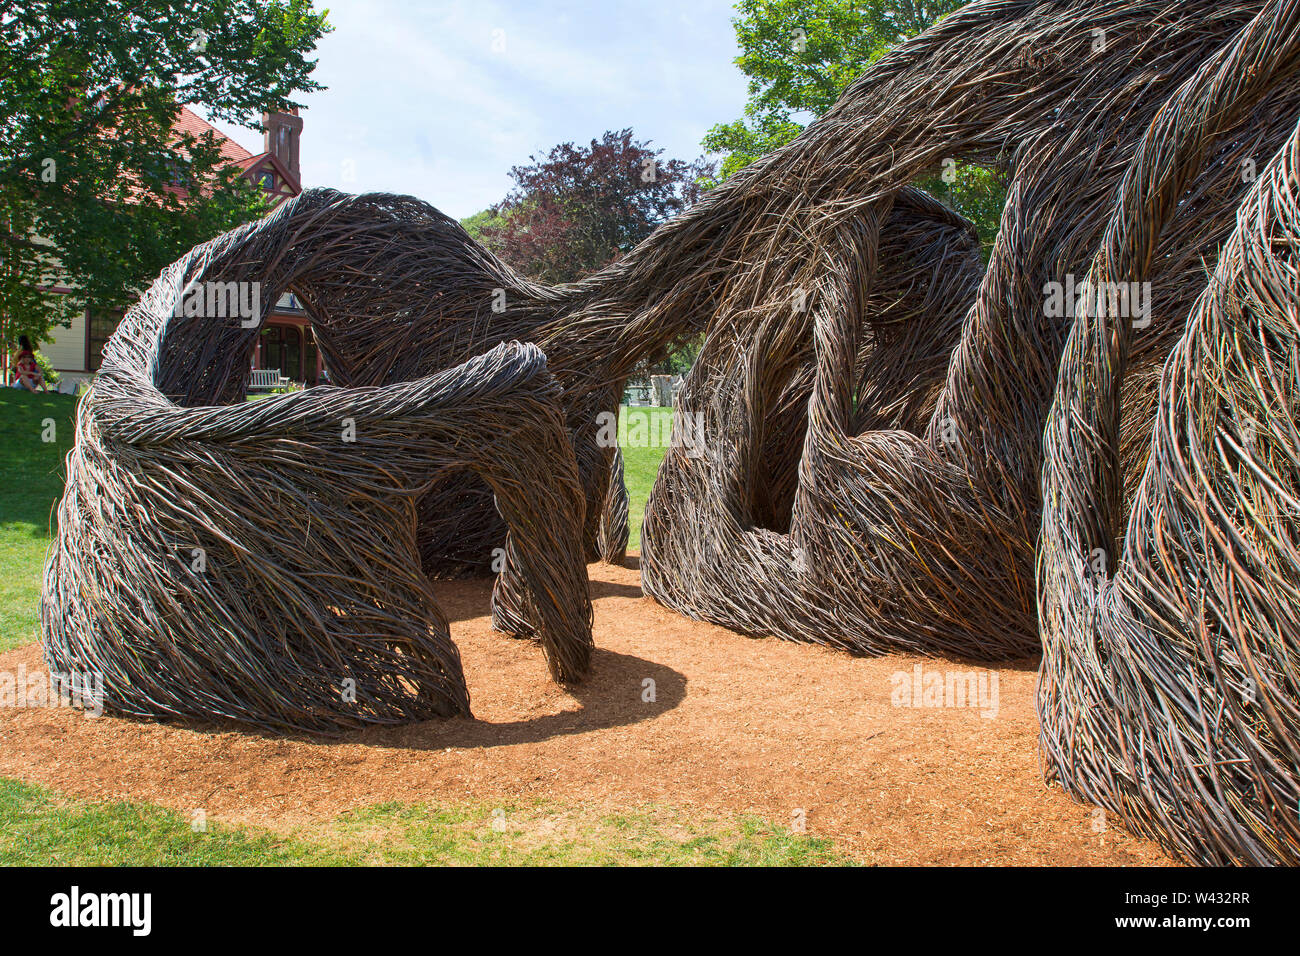 'Stickwork' a sculpture by artist Patrick Dougherty on display at Highfield, a historic summer mansion in Falmouth, Massachusetts on Cape Cod. Stock Photo